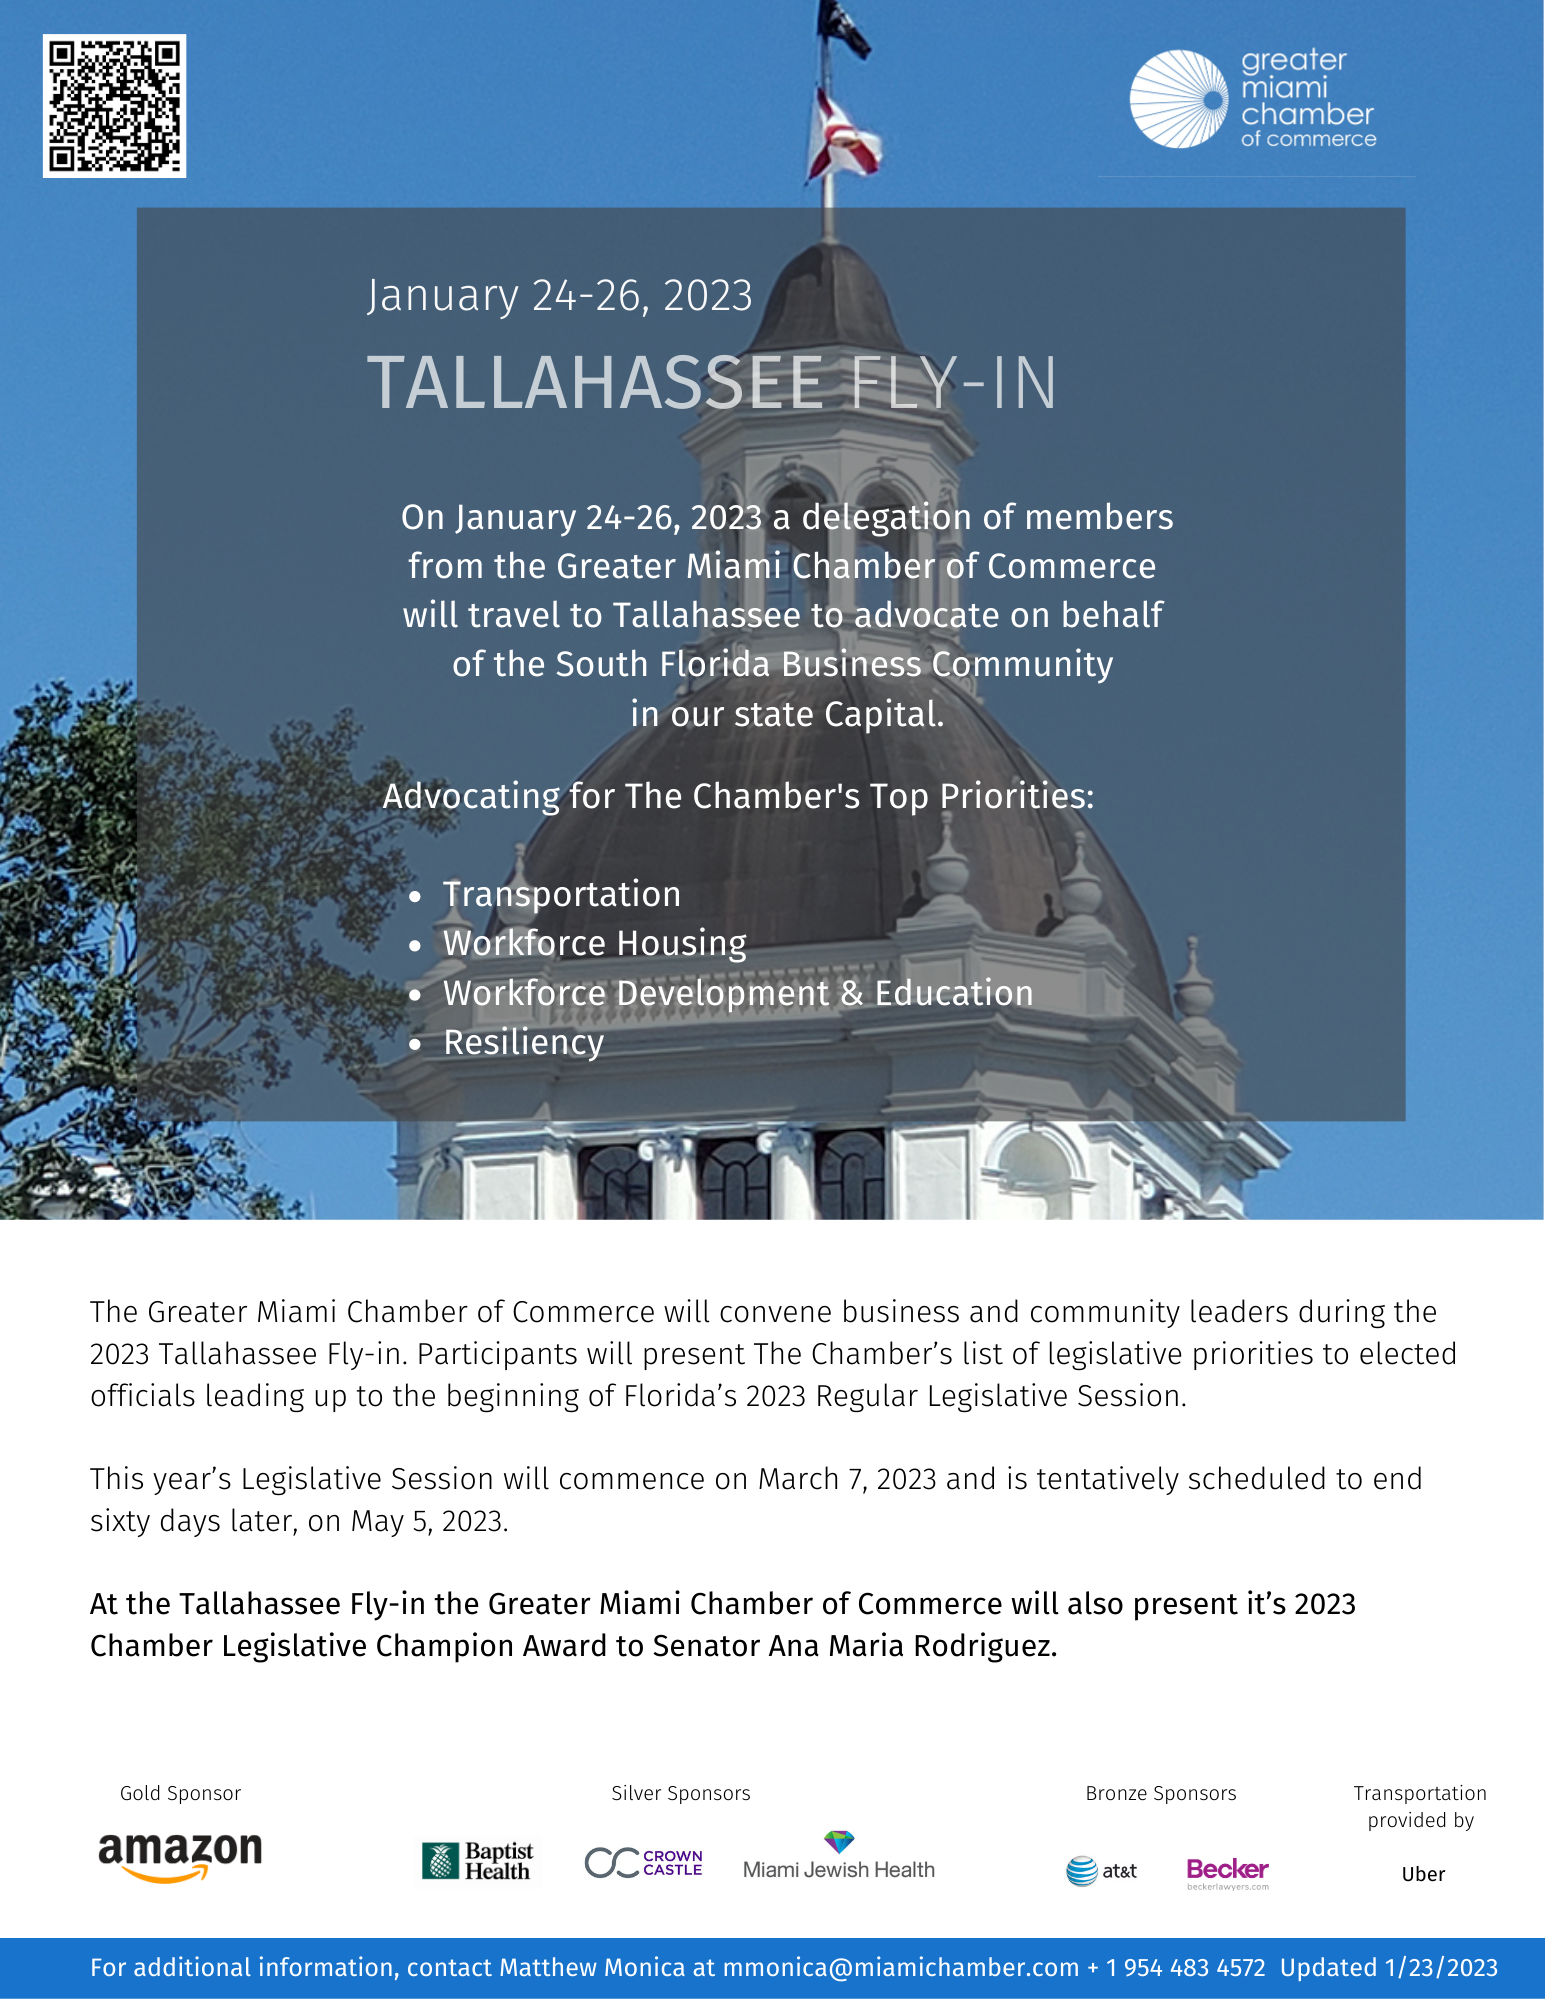 Tallahassee Fly-In